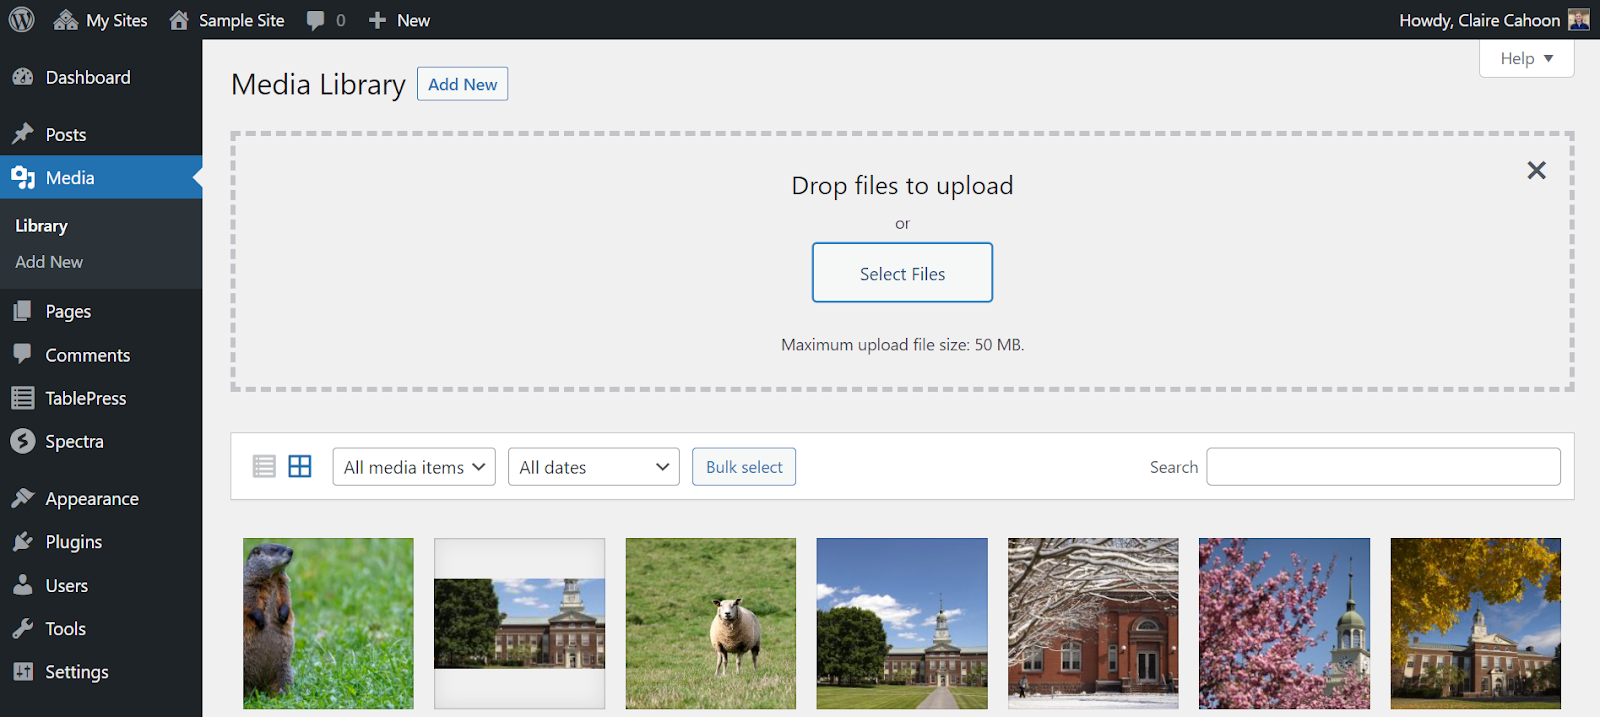 The WordPress Media Library upload page to add a new image.